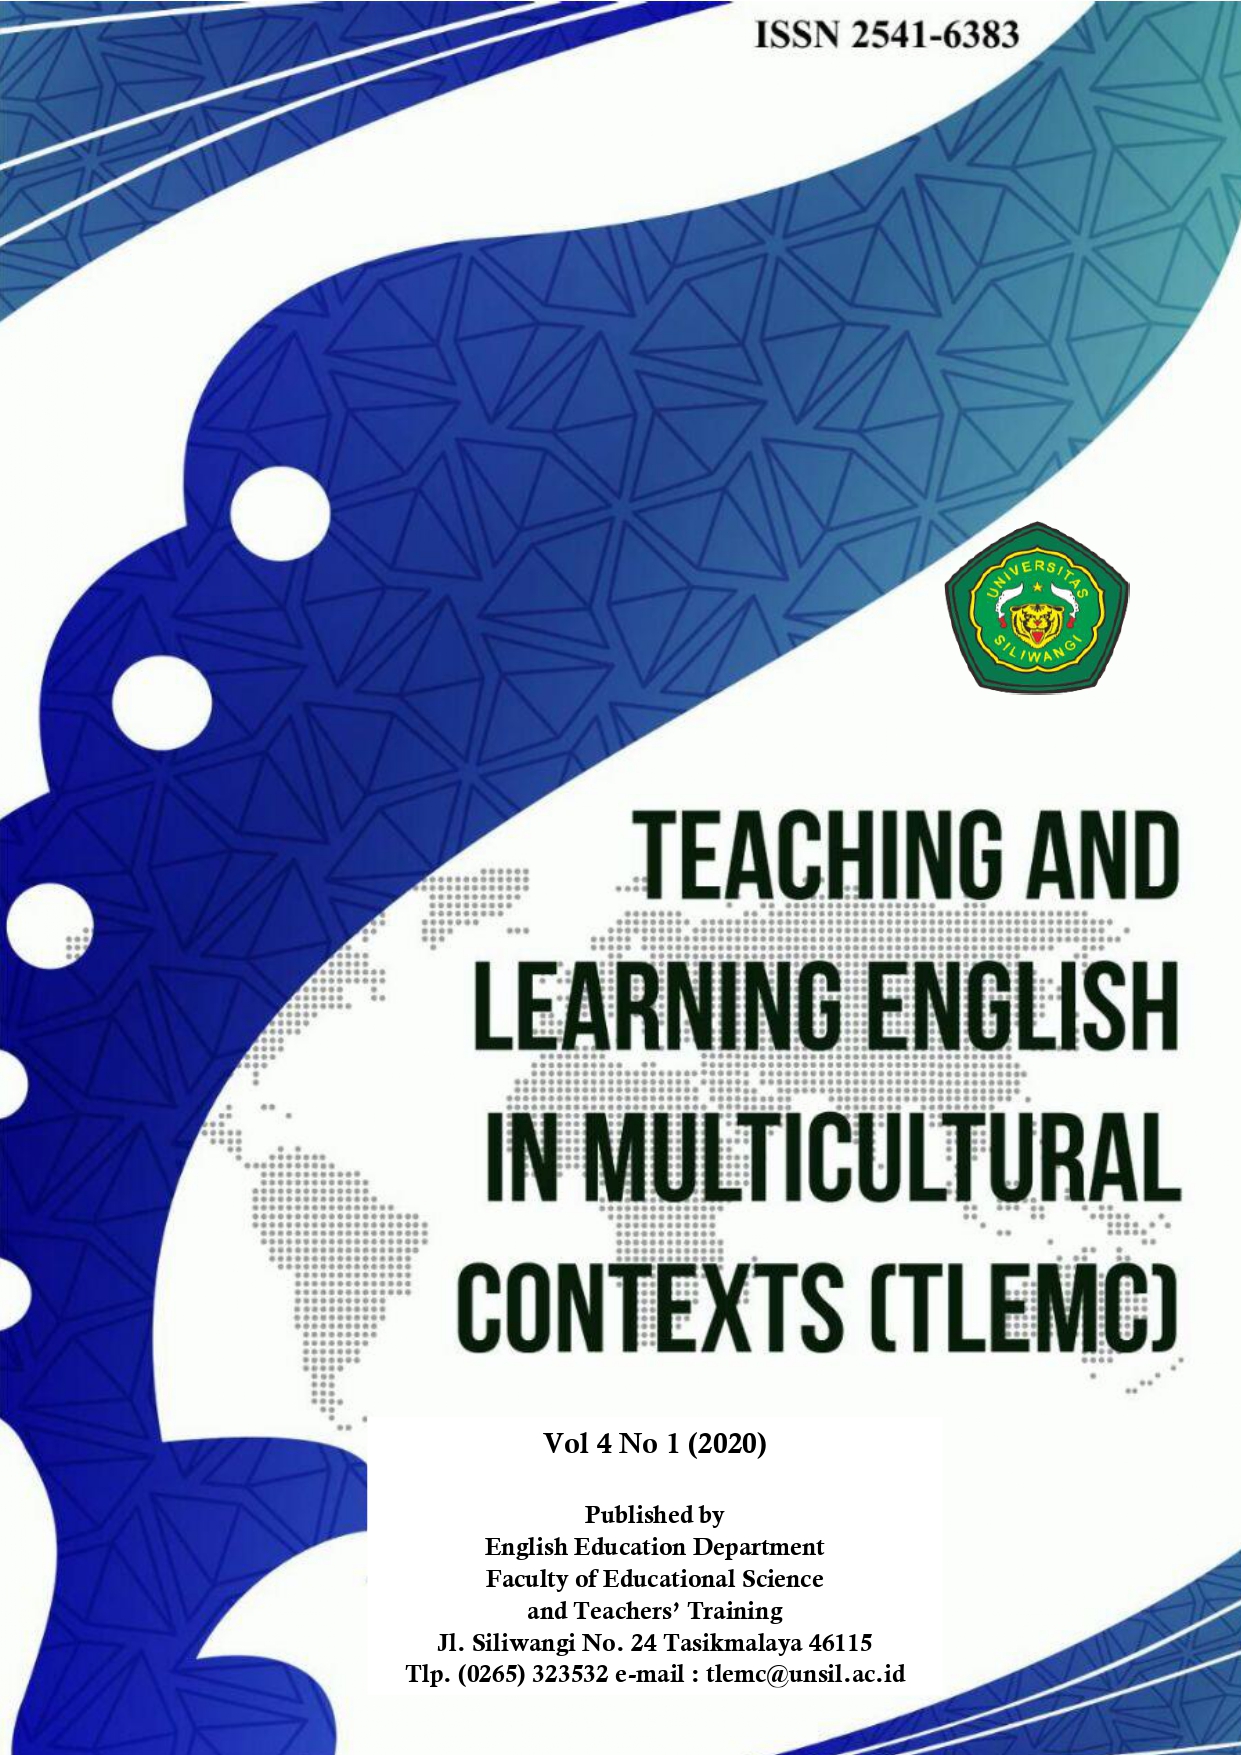 Teaching and Learning English in Multicultural Contexts Vol. 4 No 1 June 2020